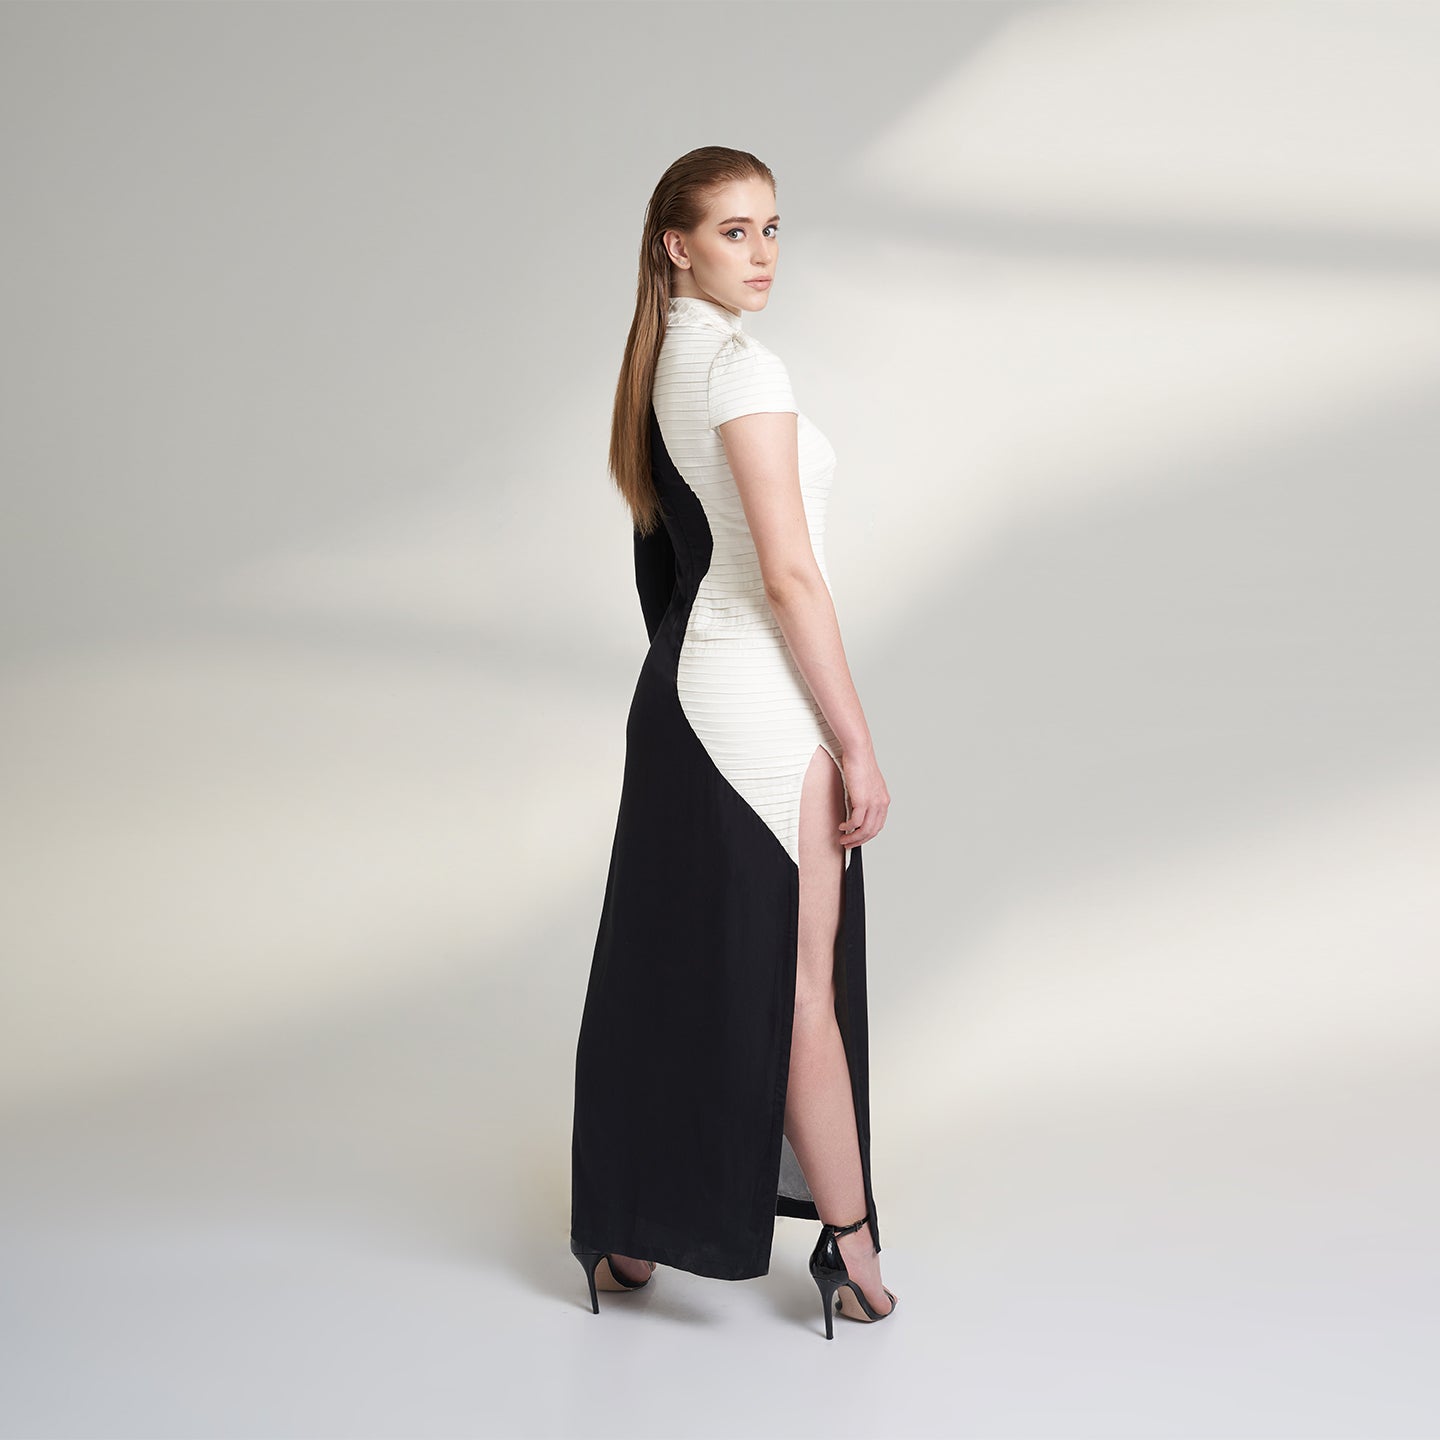 A medium size model wearing a black and white half and half dress made from organic lotus stem fabric. This sustainable vegan dress is a long floor length dress with one side pleated in white and one side plain black with a thigh high side slit striking a side pose.